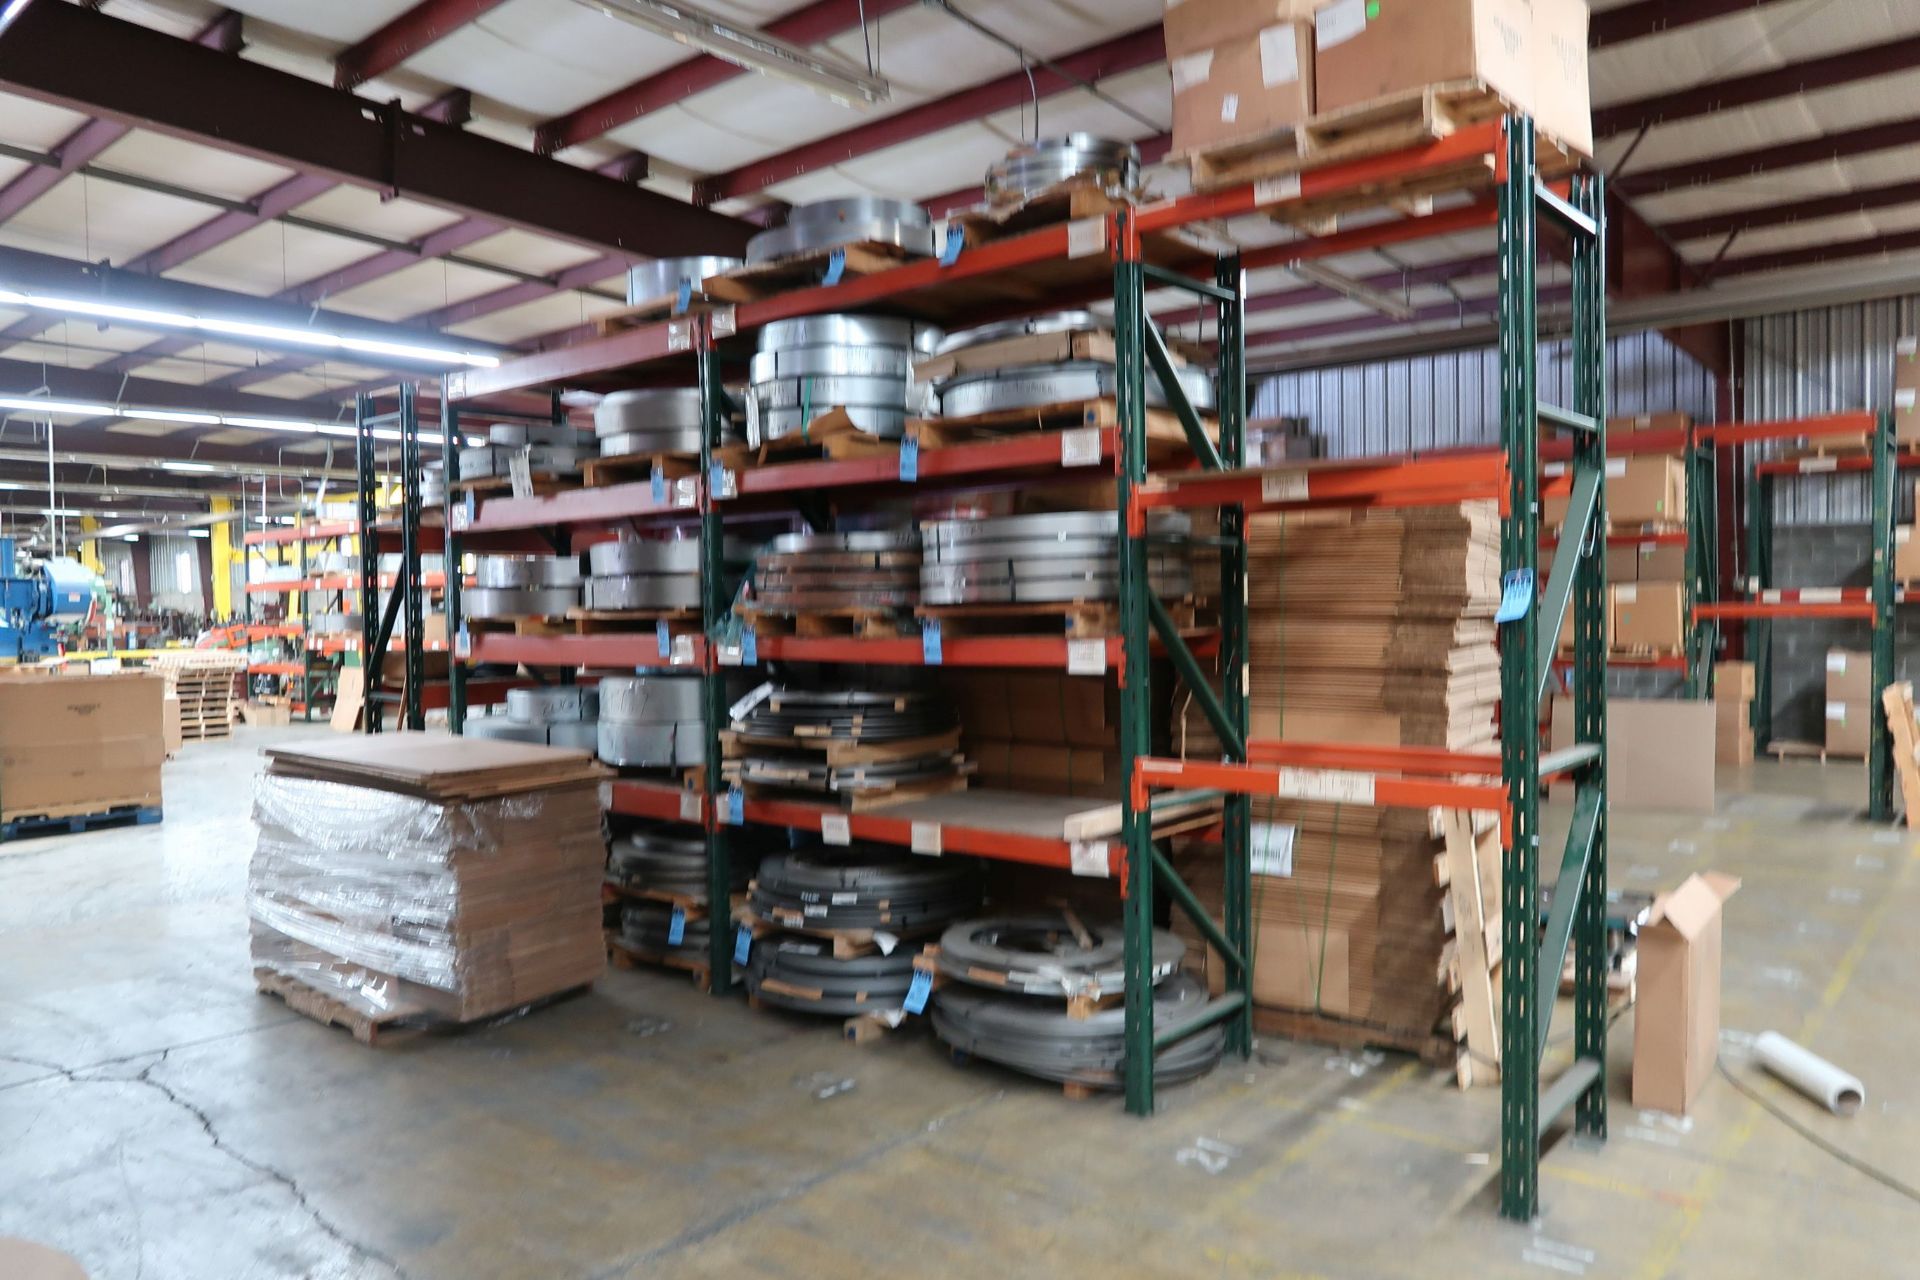 (LOT) (2) SECTIONS 84" X 30" X 120" AND (1) SECTION 46" X 30" X 120" ADJUSTABLE BEAM PALLET RACK